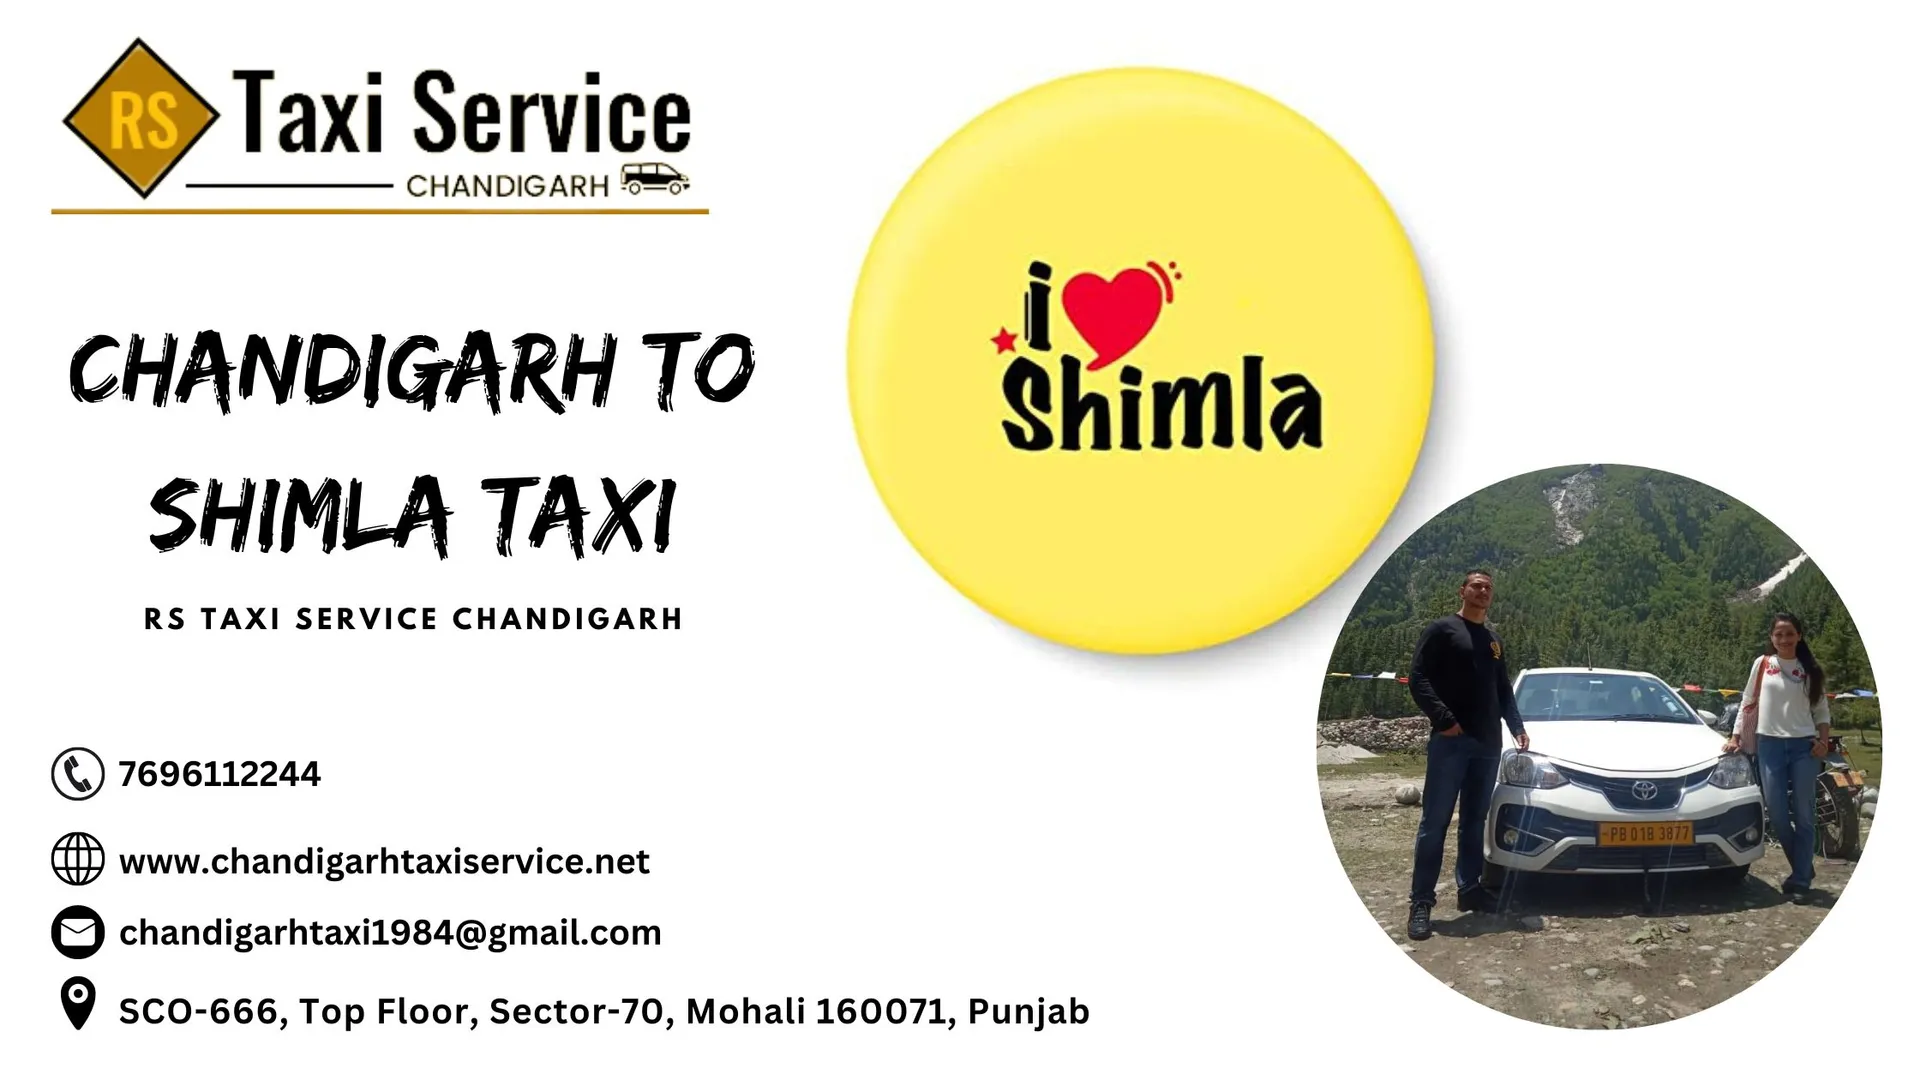 RS Taxi Service Chandigarh is your perfect travel companion for an unforgettable taxi ride from Chandigarh to Shimla. Experience the beauty of the hills and lush landscapes as our expert drivers take you on a comfortable and safe journey.

Book your taxi today and get ready for an enchanting adventure through the scenic routes of Himachal Pradesh! https://www.chandigarhtaxiservice.net/chandigarh-to-shimla-taxi-service